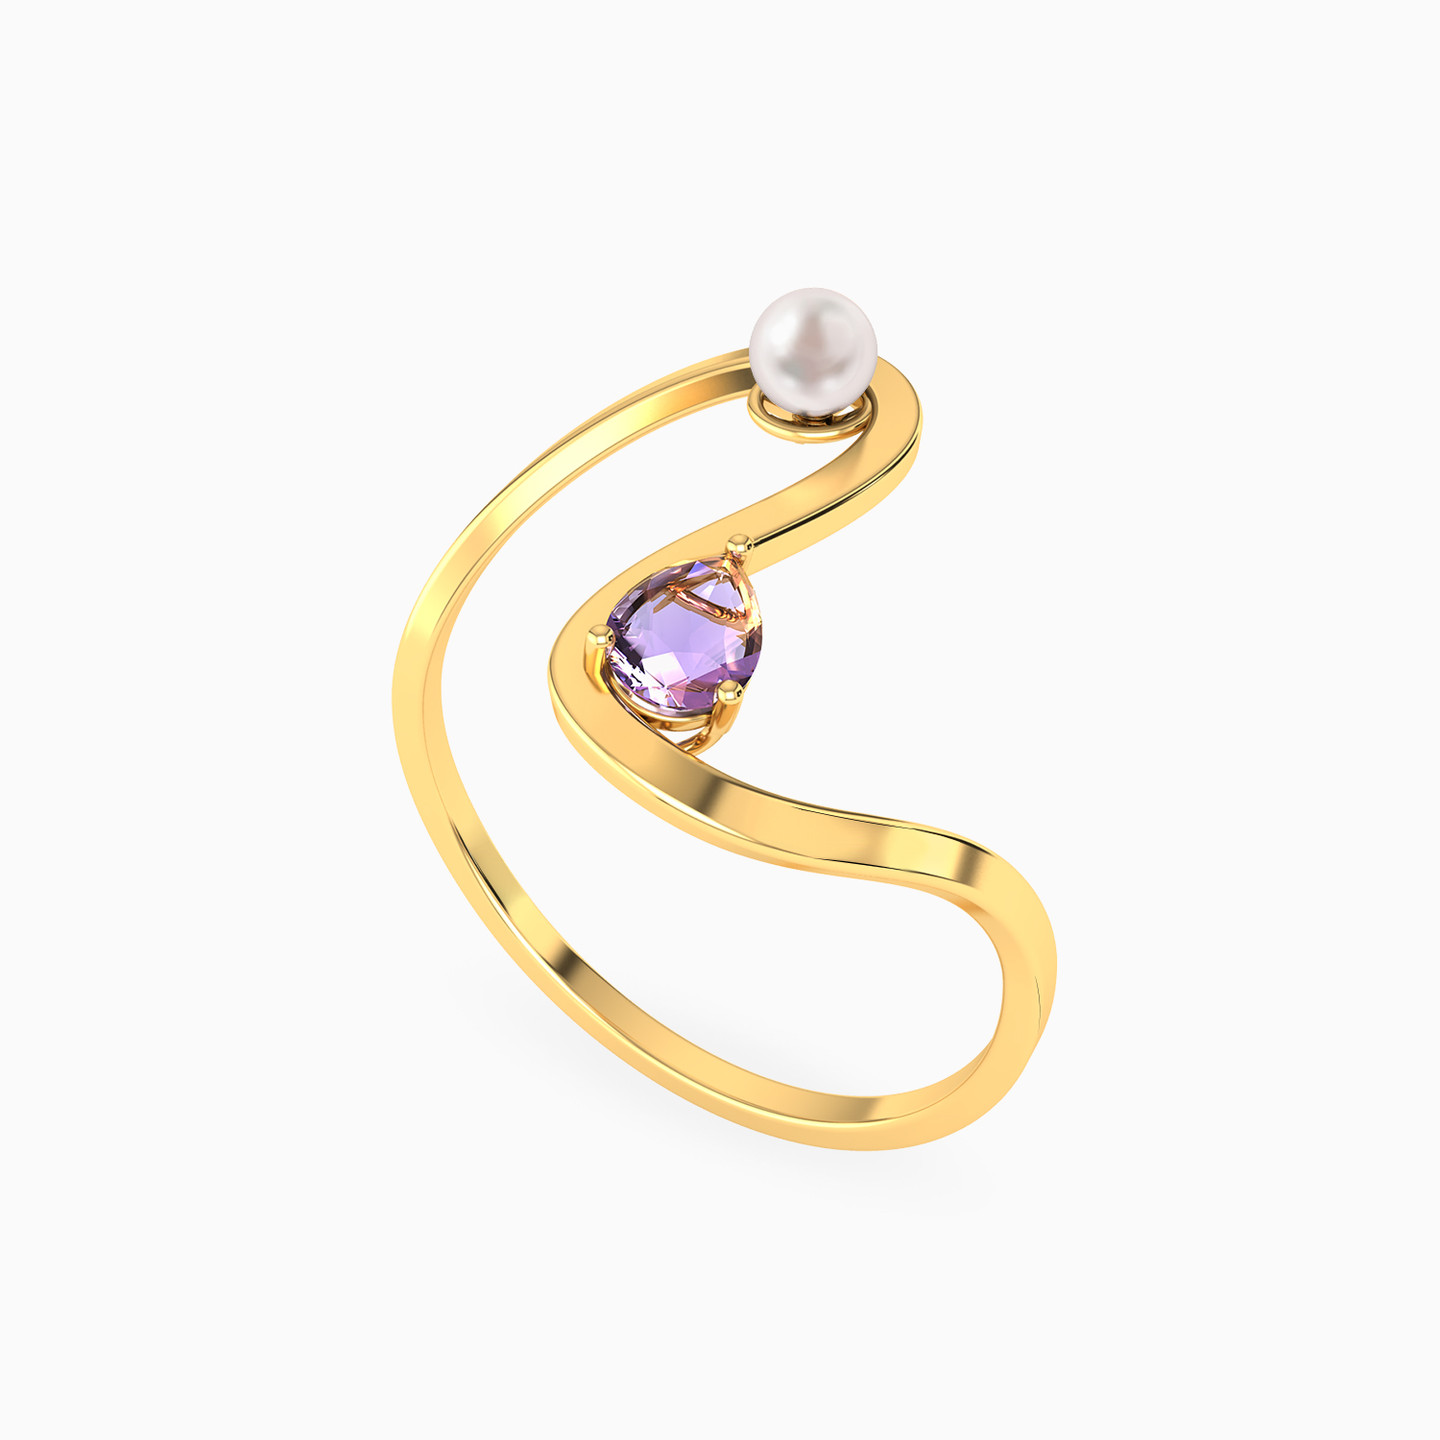 18K Gold Pearls & Colored Stones Statement Ring - 2